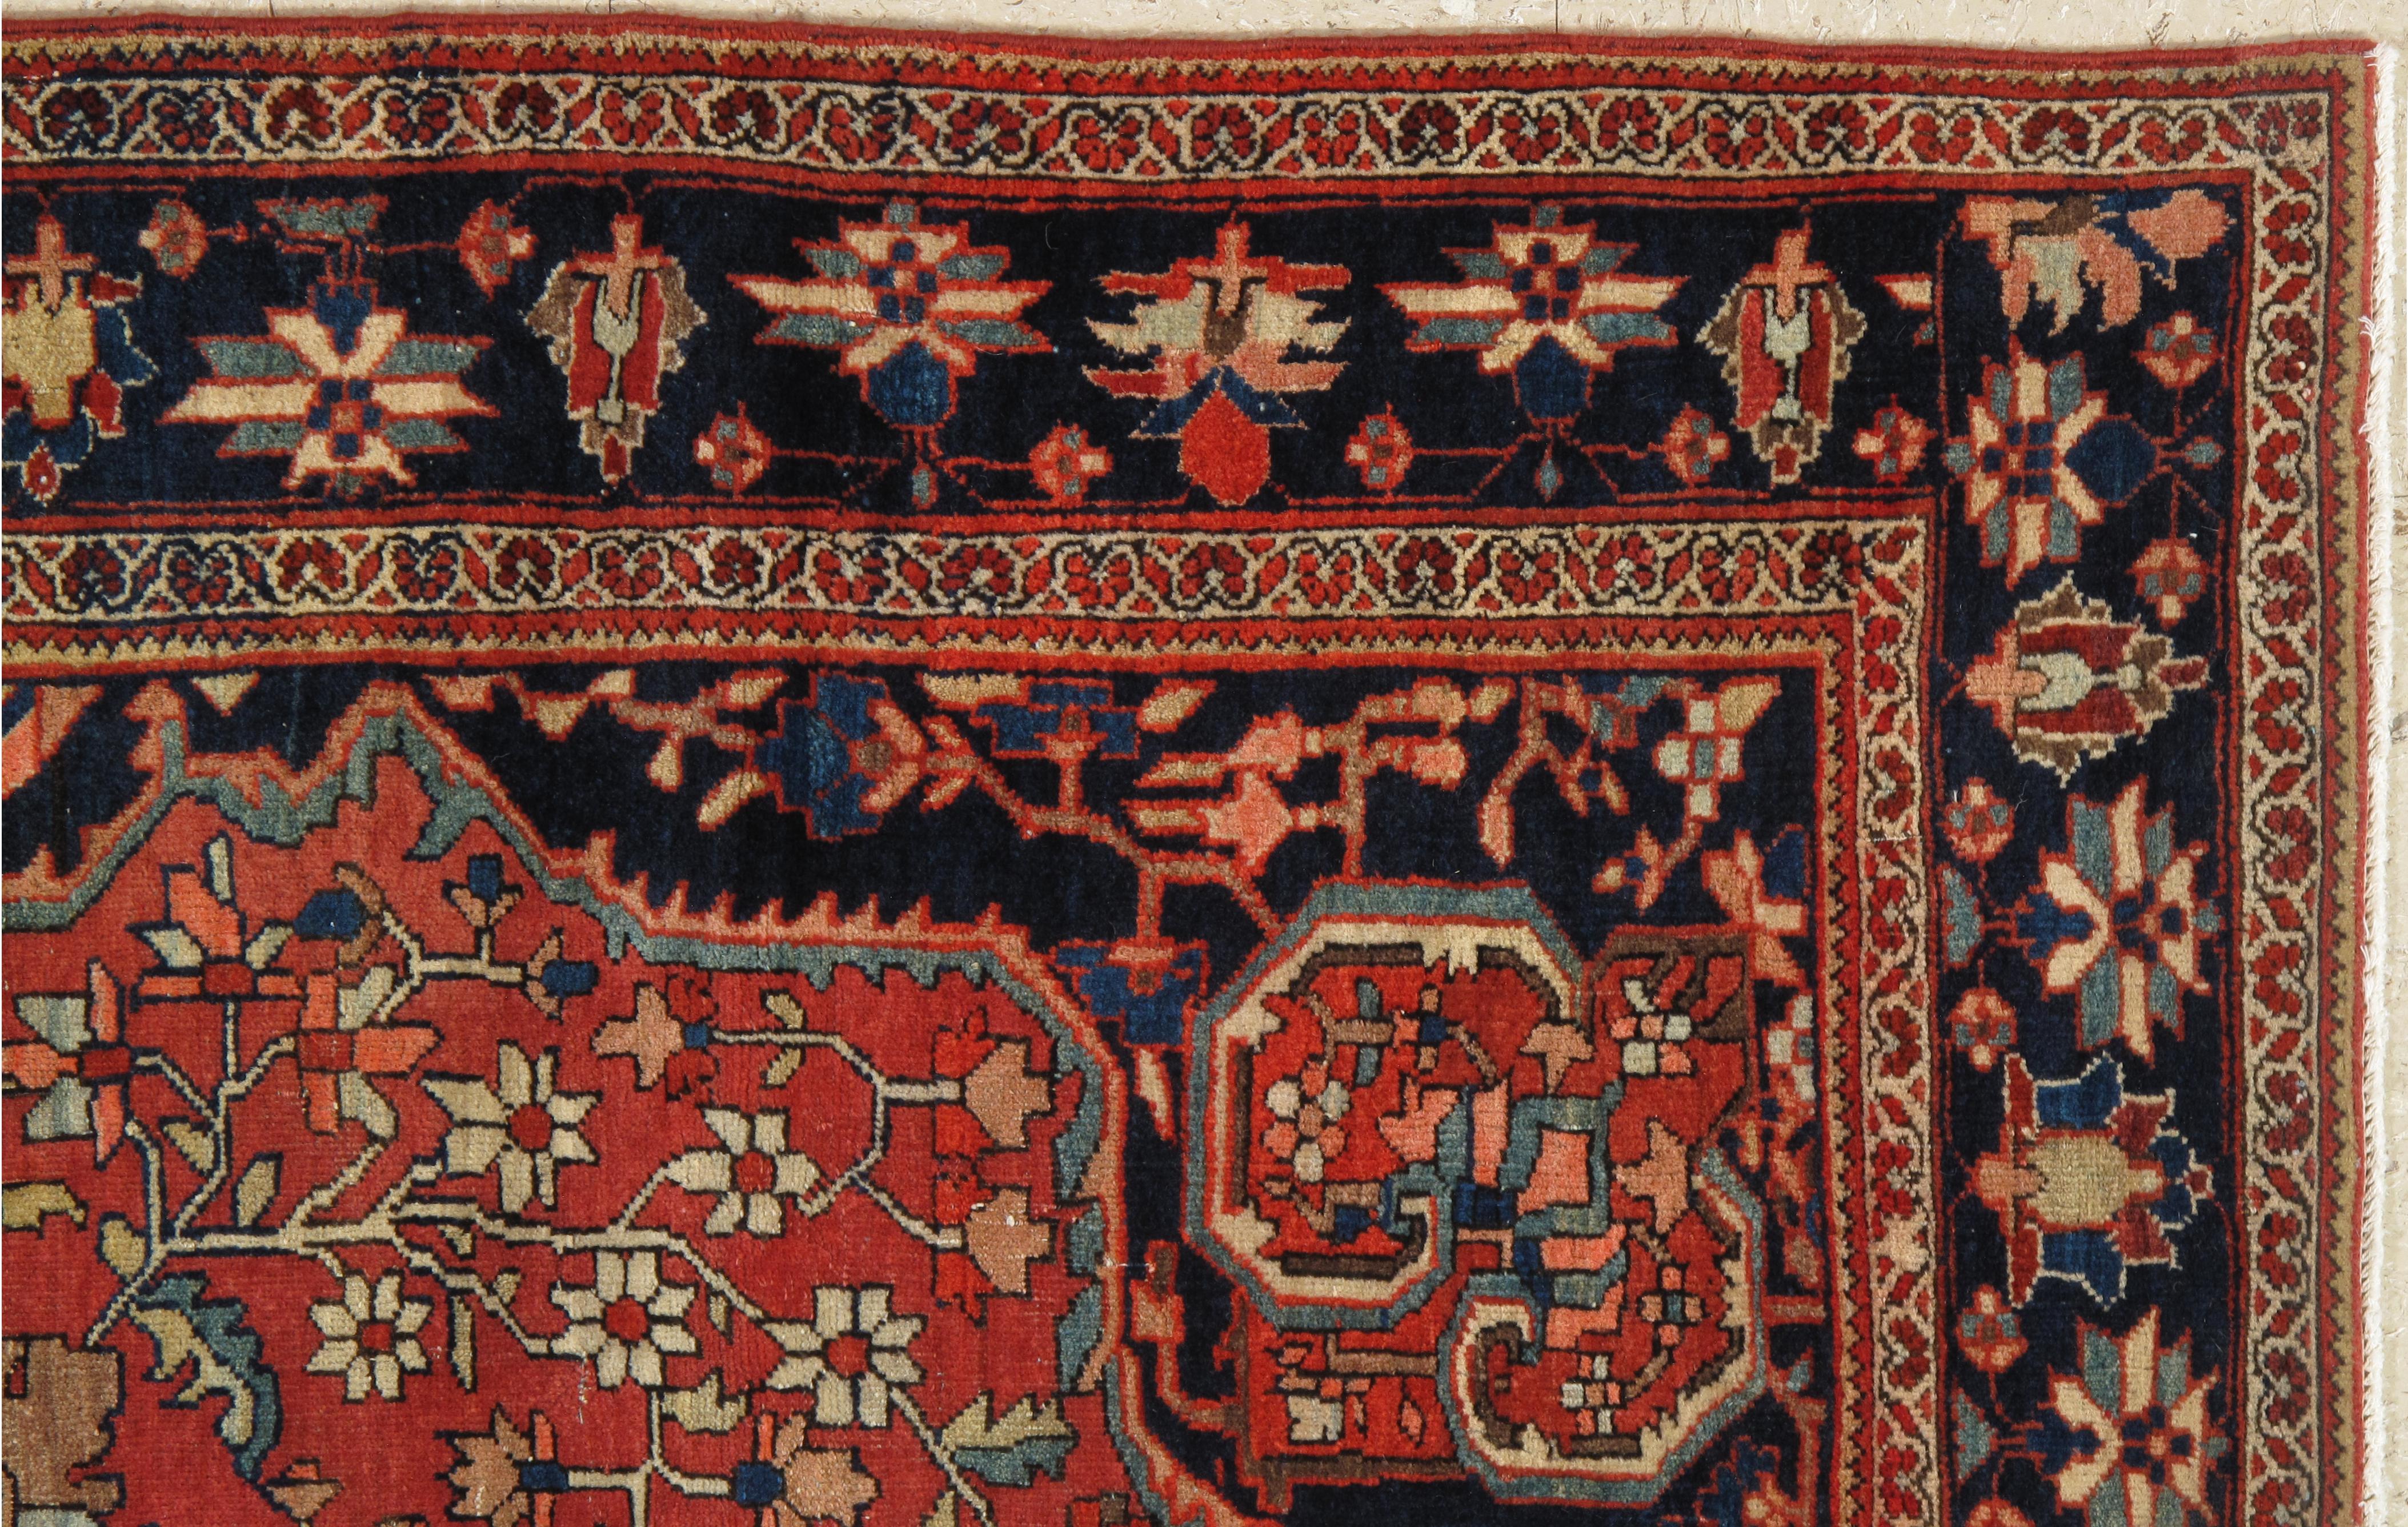 Finely woven Farahan Sarouks were produced in the late 19th century until just before world war I. 

They have become extremely rare and are highly valued for their artistry and colors. This is a beautiful early 20th century example.

Rug measures: